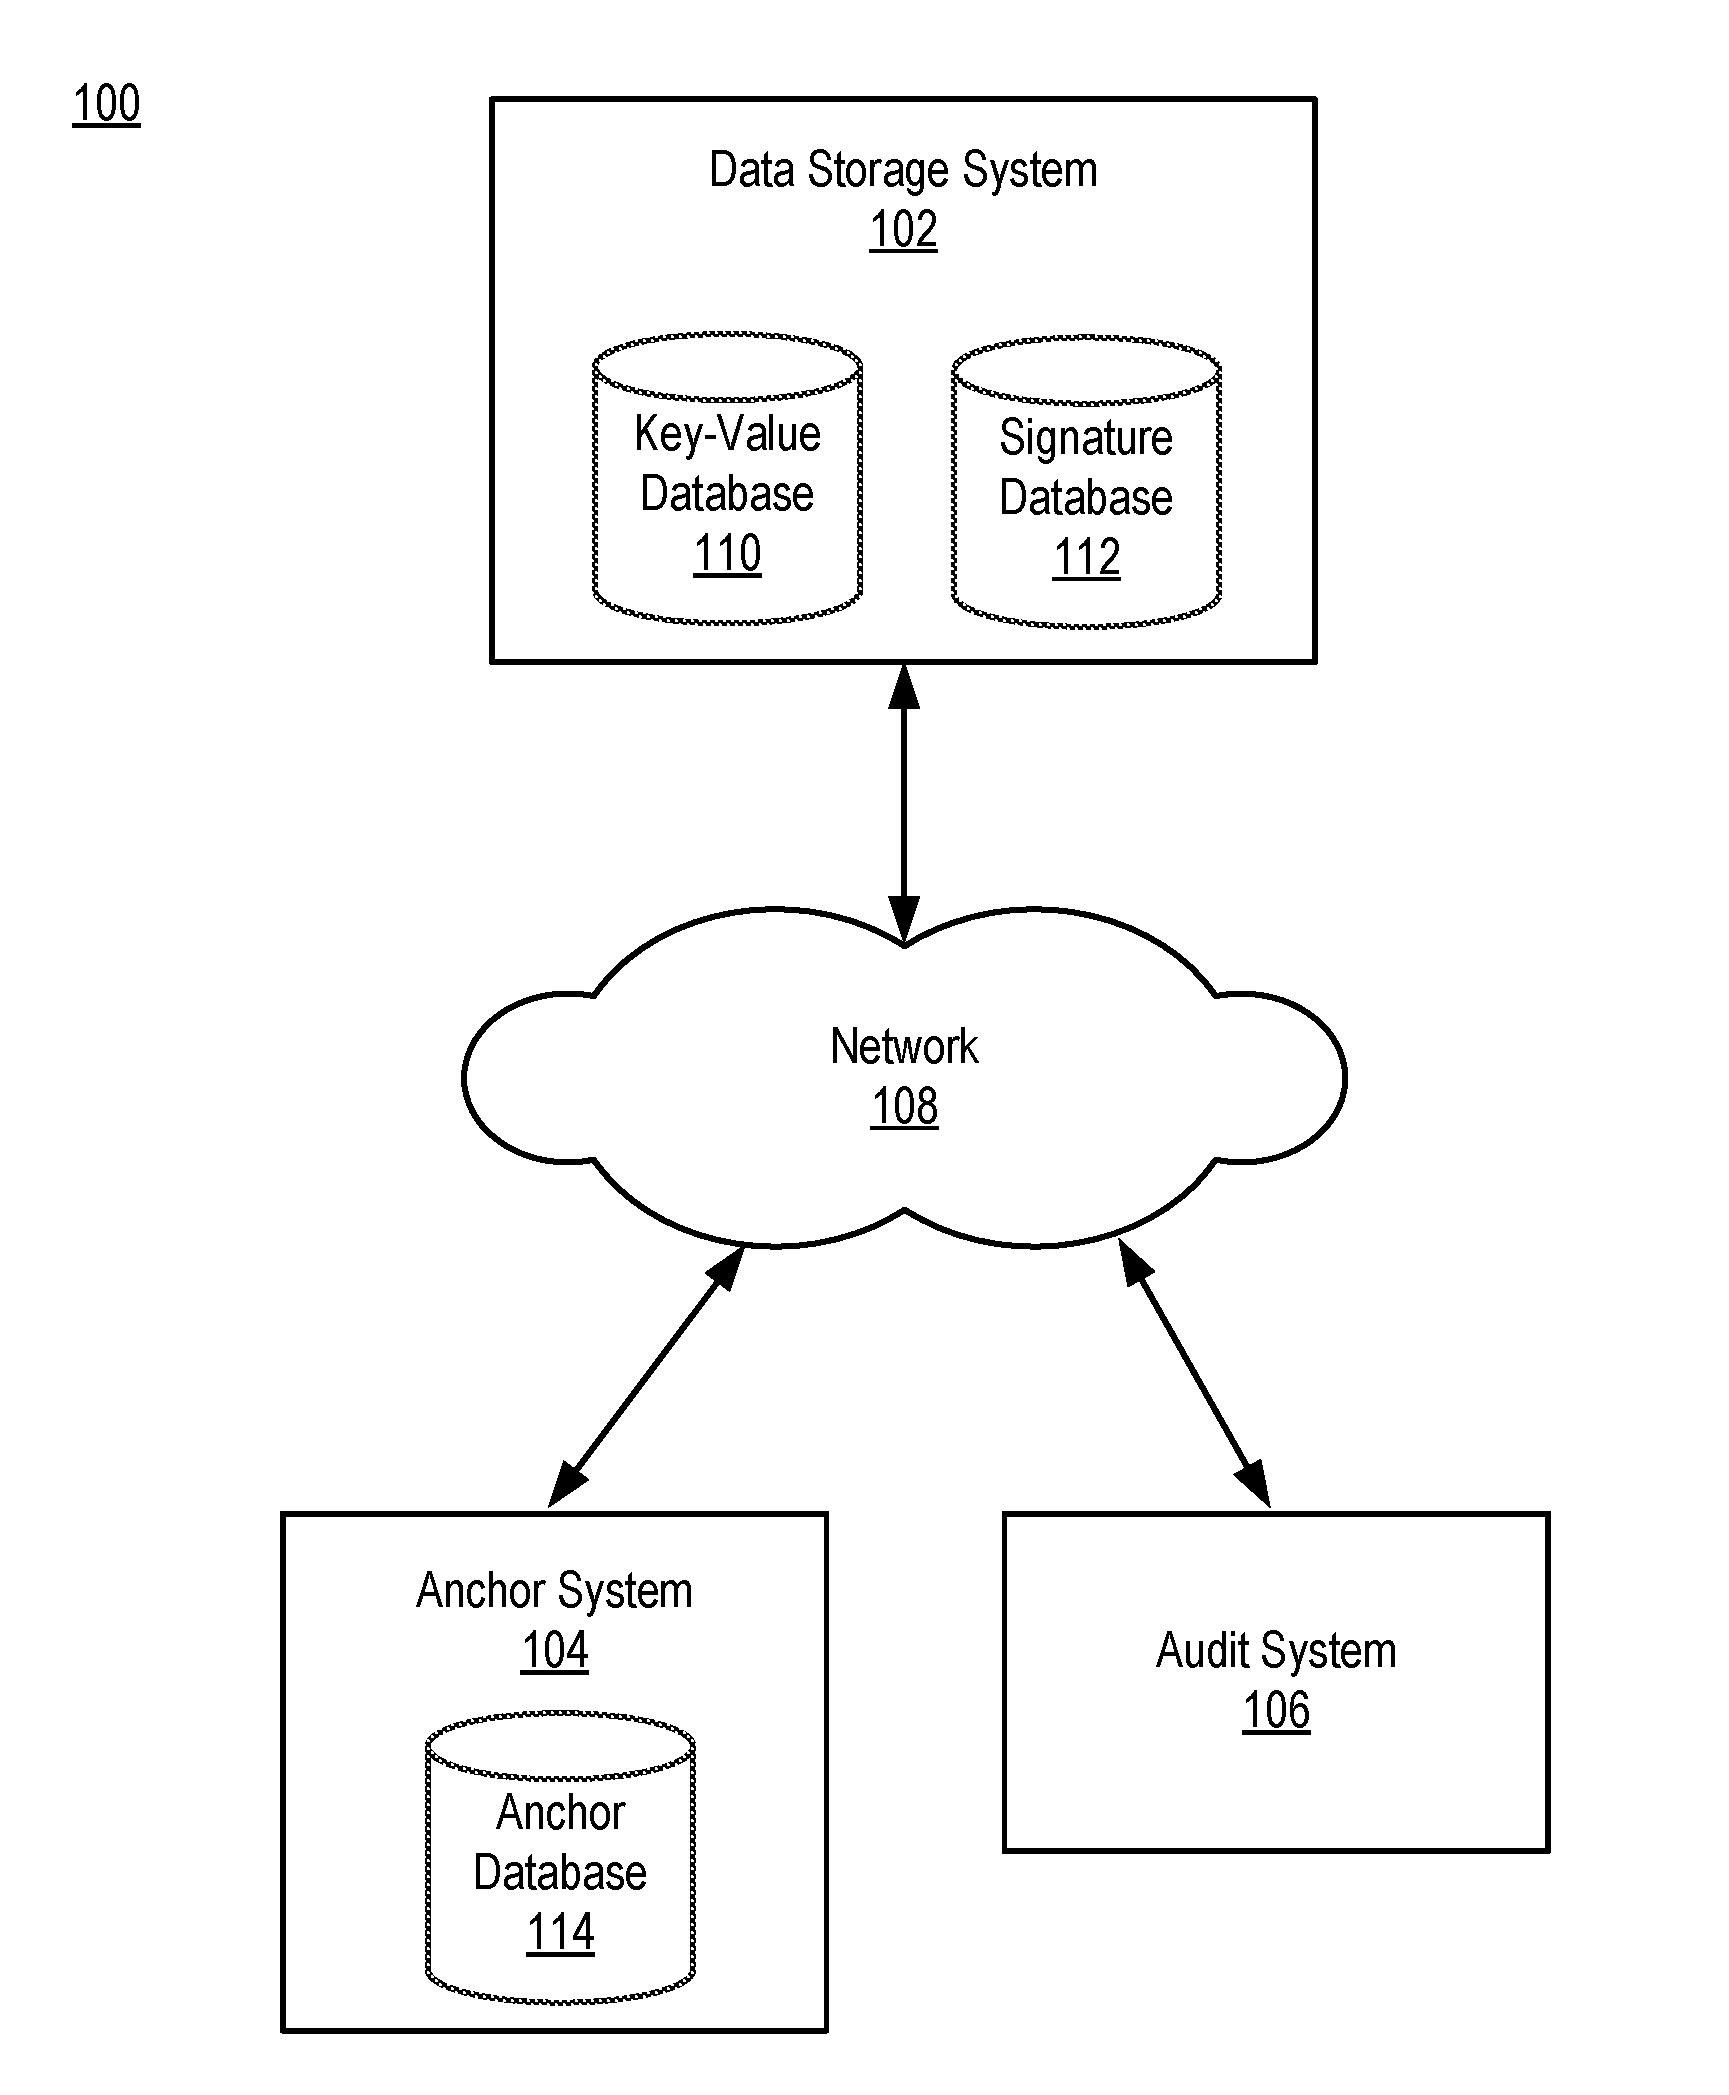 Making cryptographic claims about stored data using an anchoring system